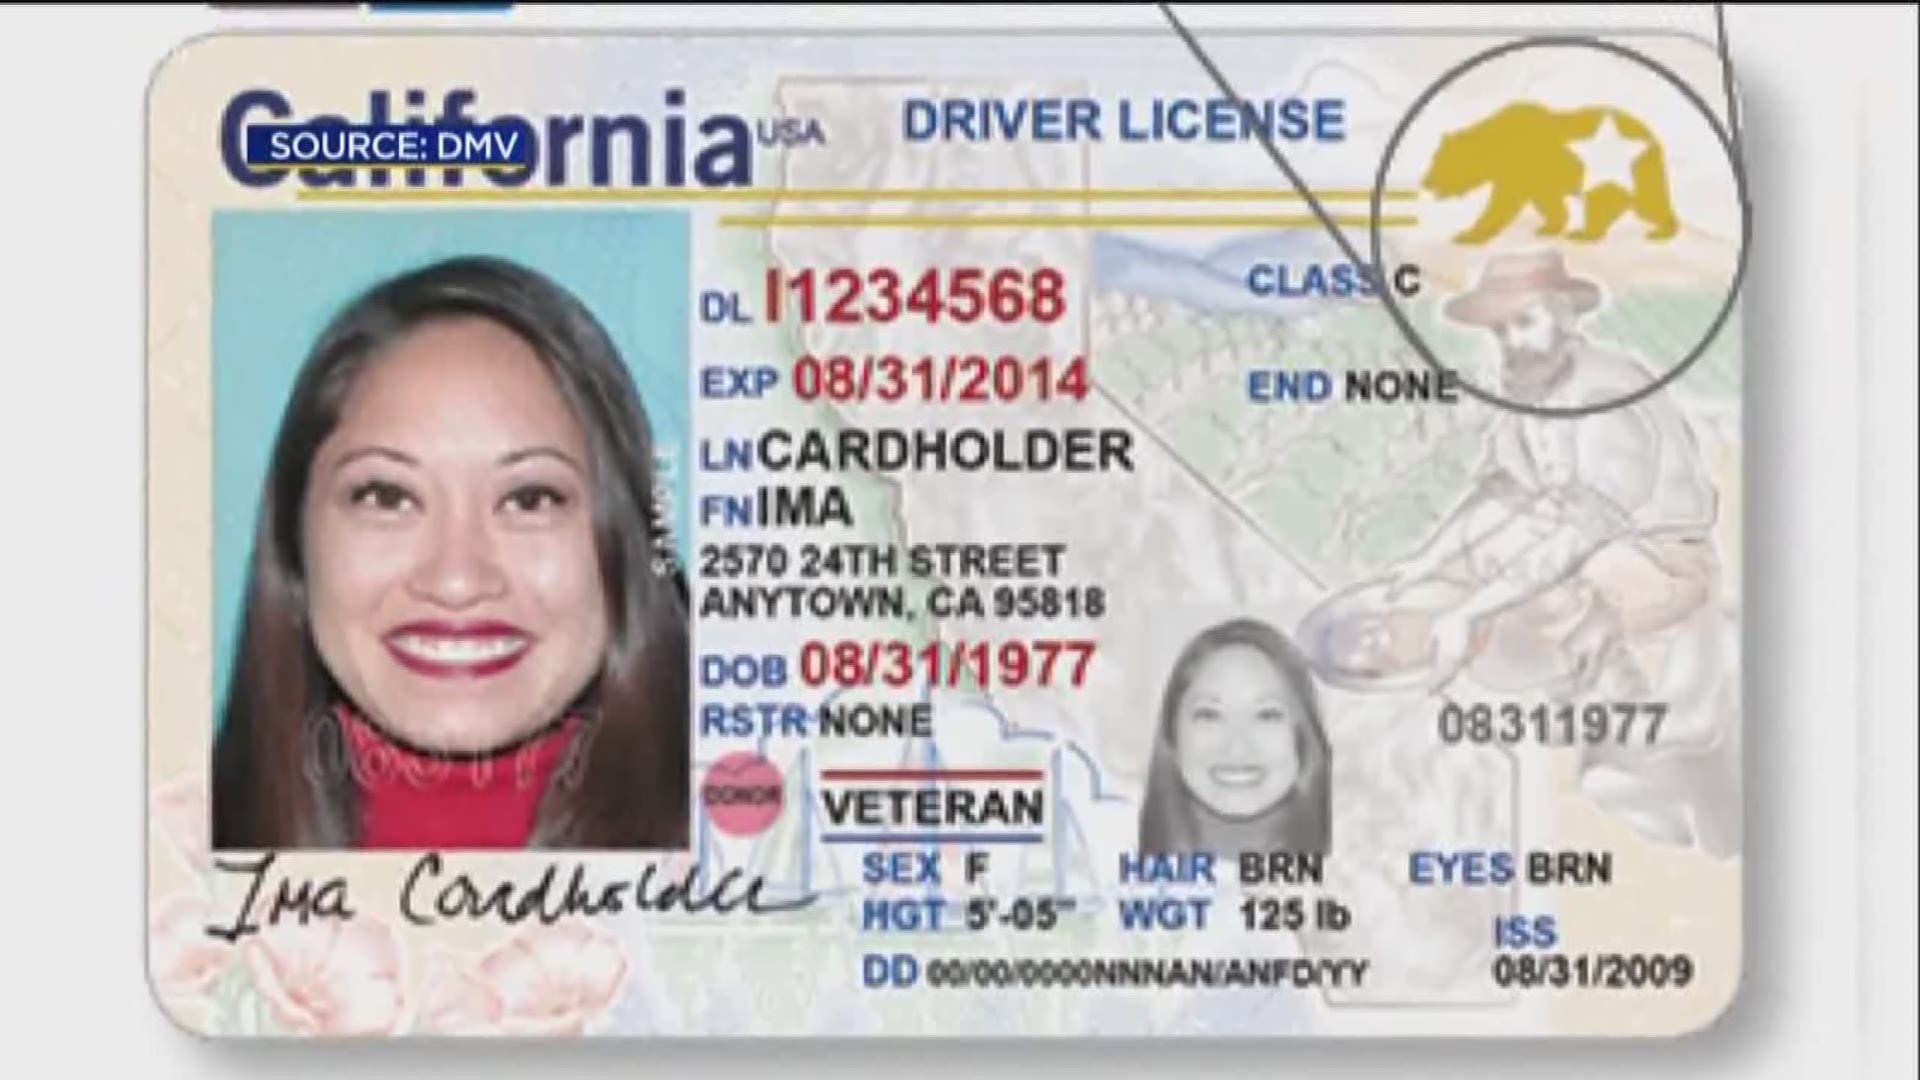 The Department of Homeland Security has told the DMV that Californians will need to provide two forms of residency.